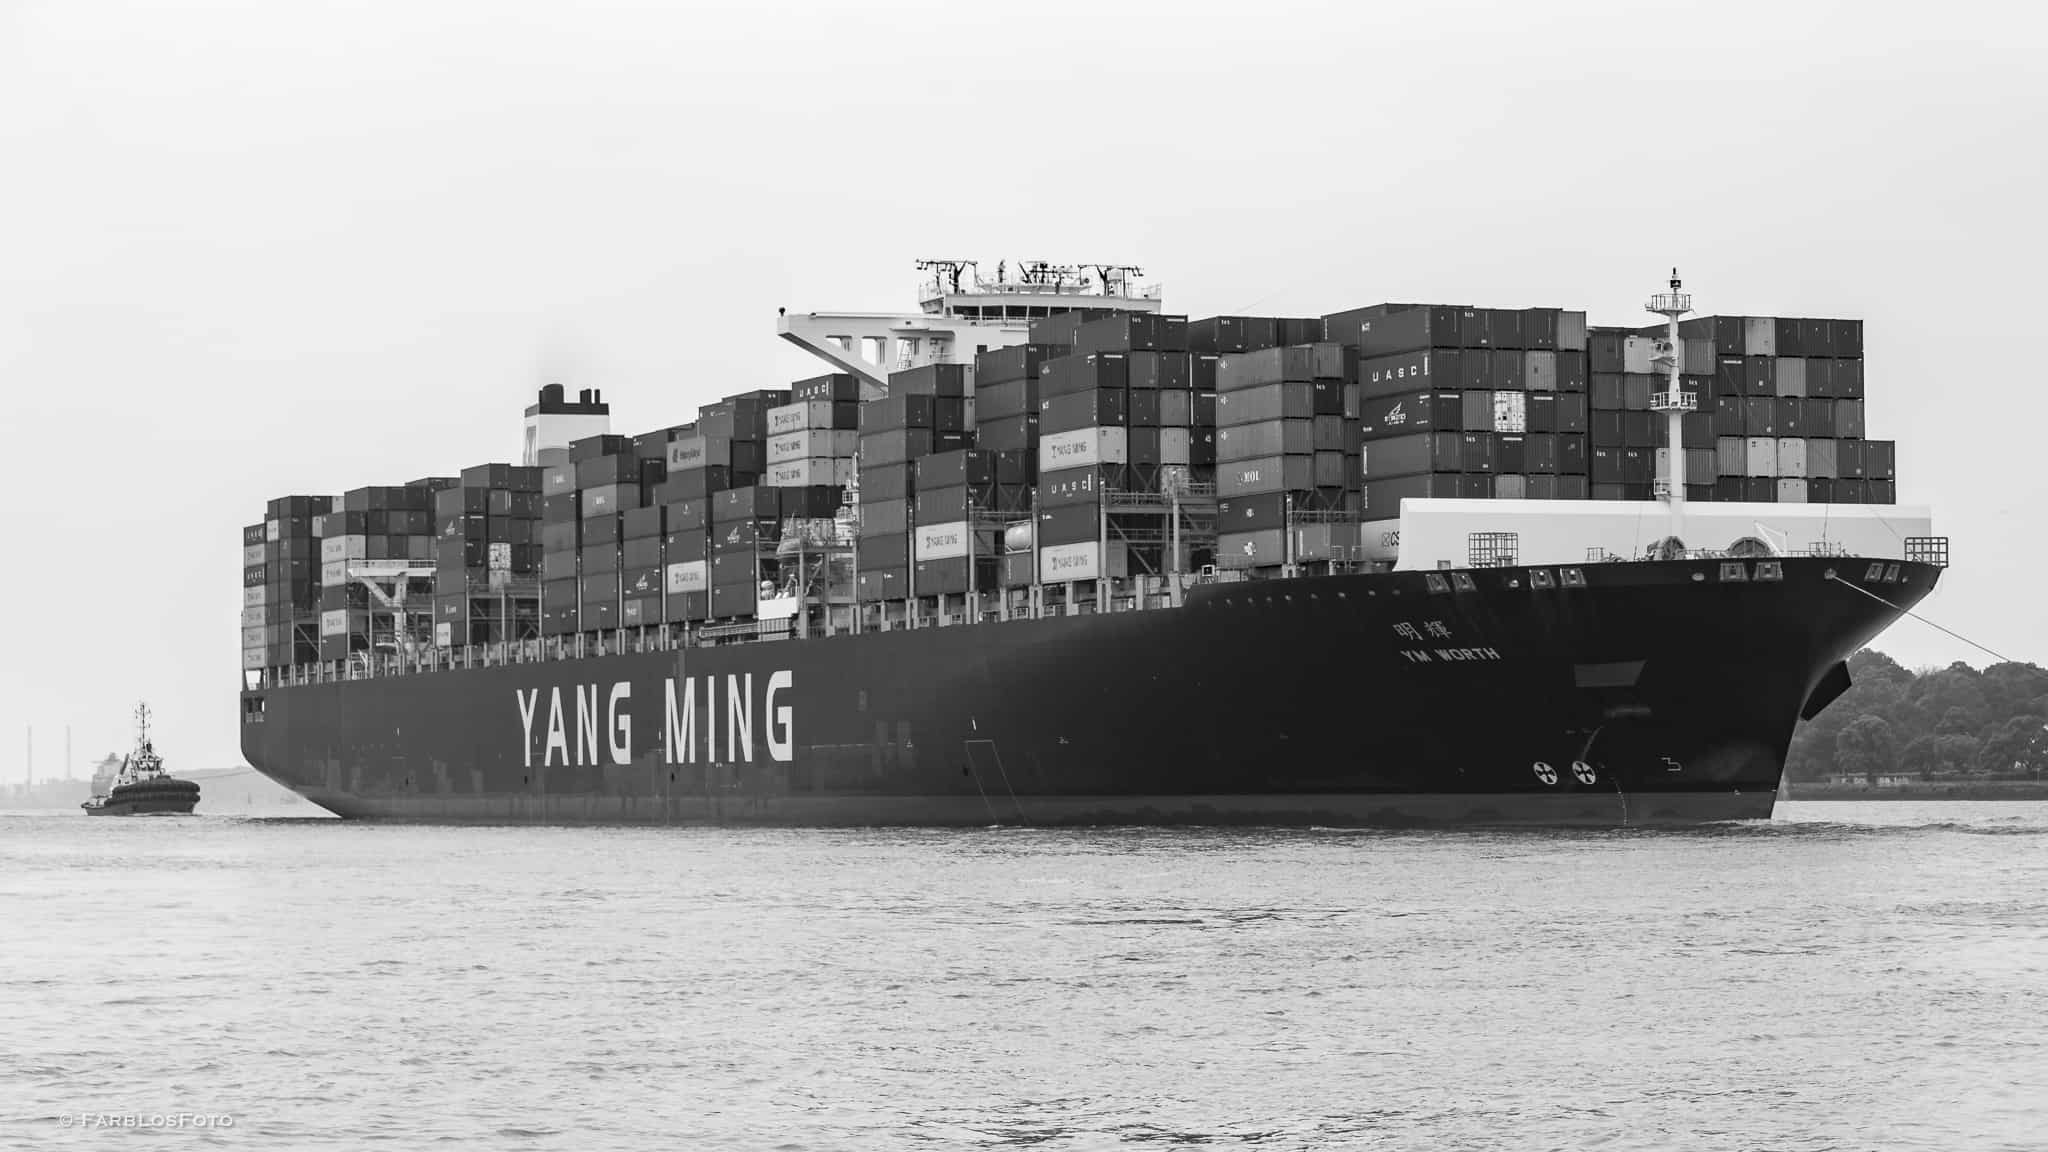 Yang MIng YM Worth Containerschiff